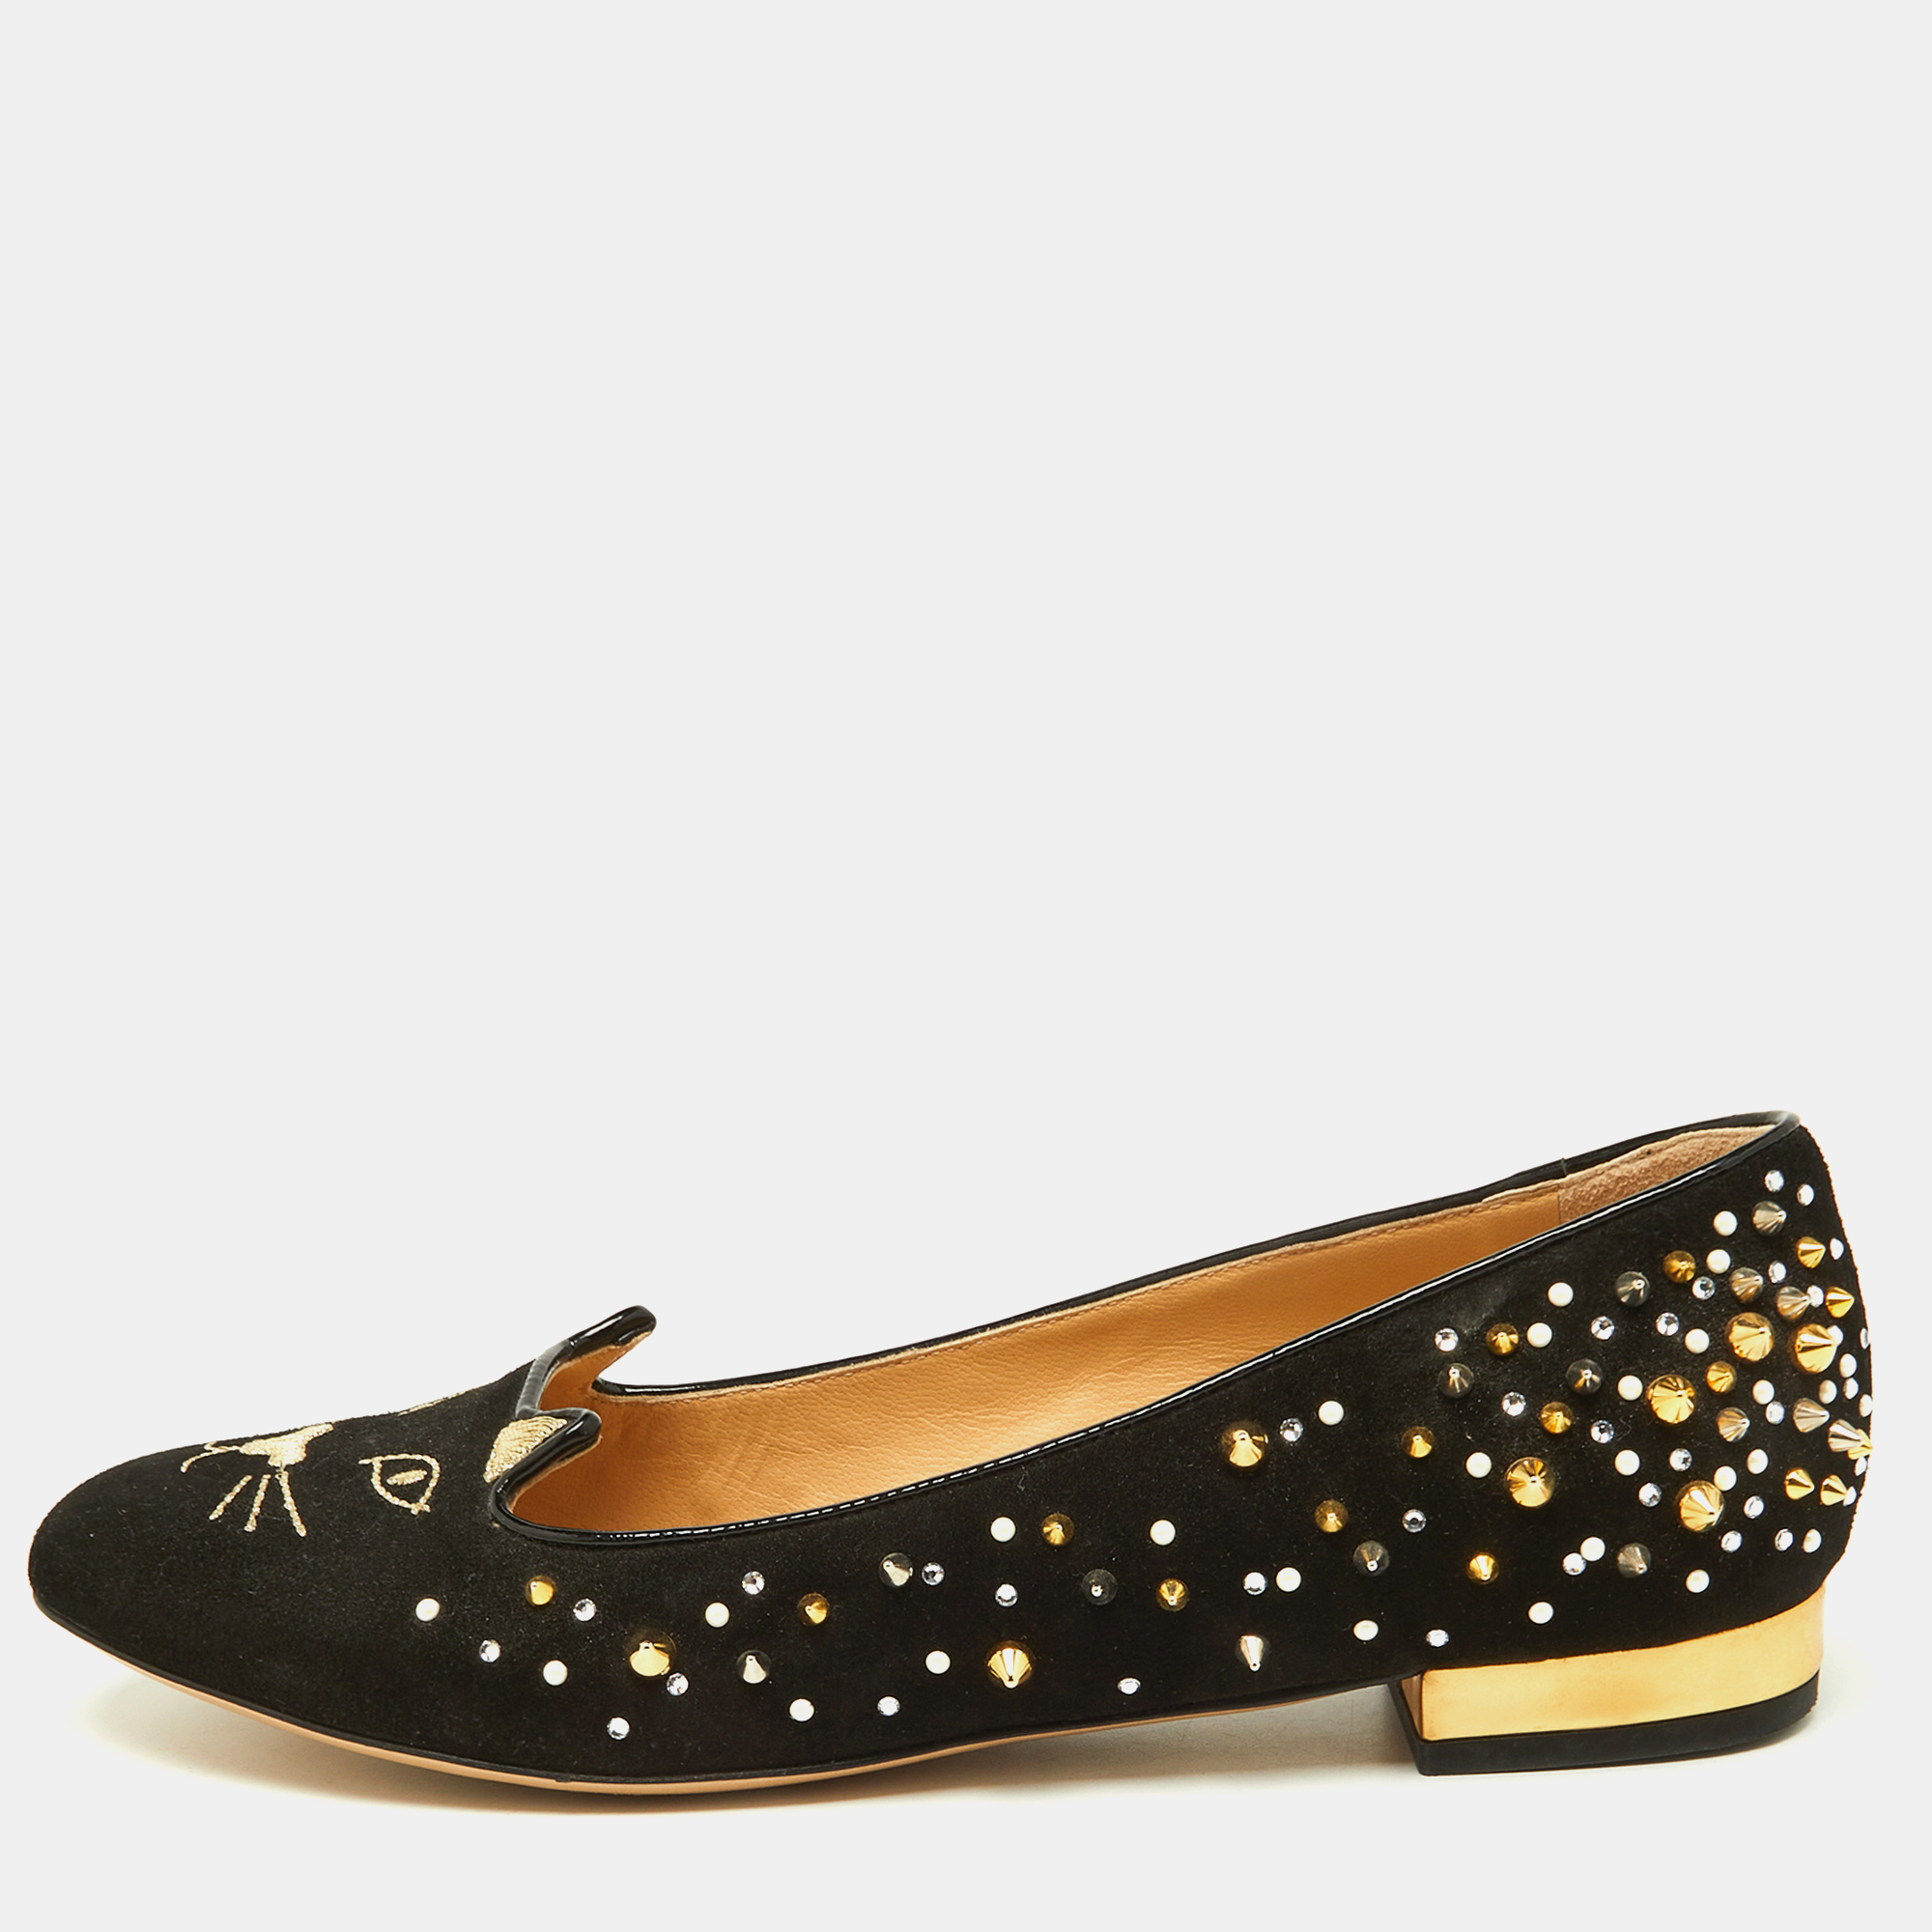 Charlotte olympia black suede kitty spikes ballet flats size 37.5